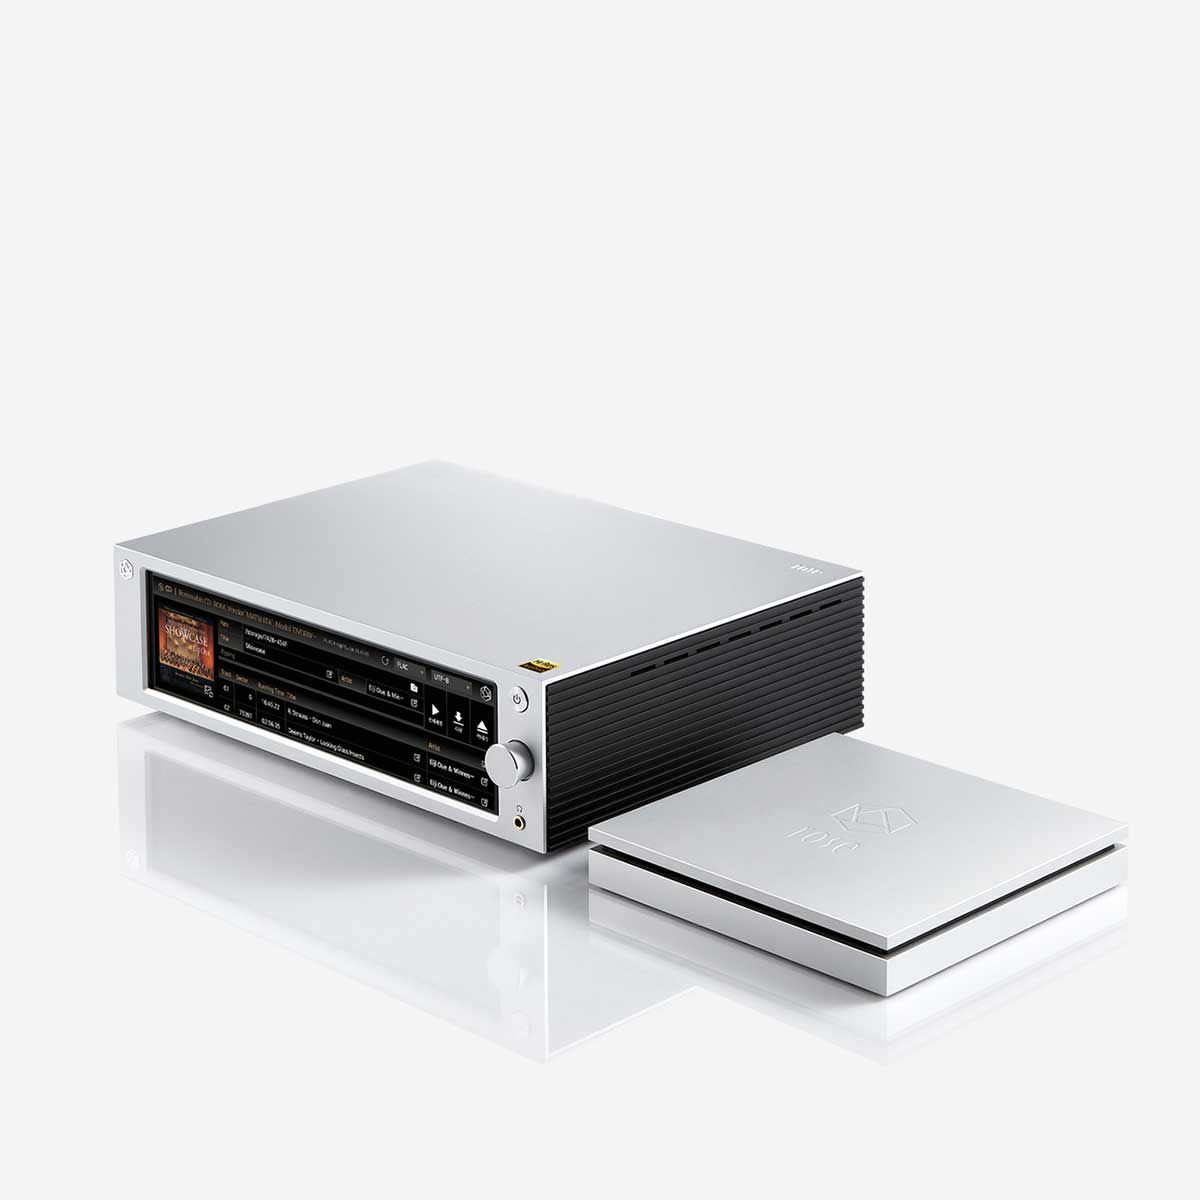 Top angled view of the HiFi Rose RSA780 CD Drive next to a HiFi Rose Network Player/Streamer